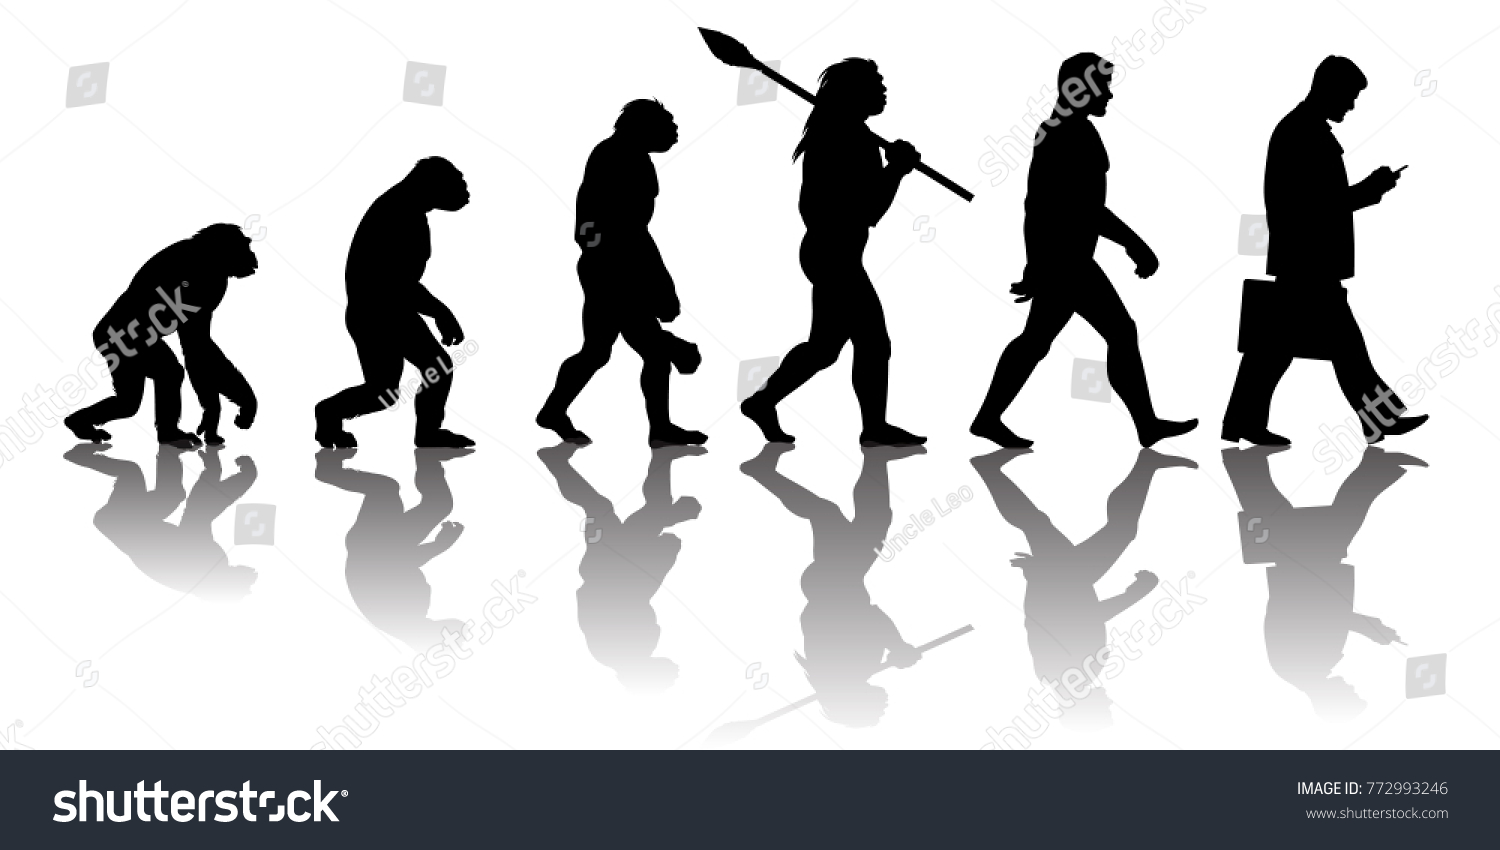 SVG of Theory of evolution of man. Silhouette with transparent reflection. Human development from monkey to modern businessmen with  briefcase talking on mobile phone. Vector illustration isolated on white. svg